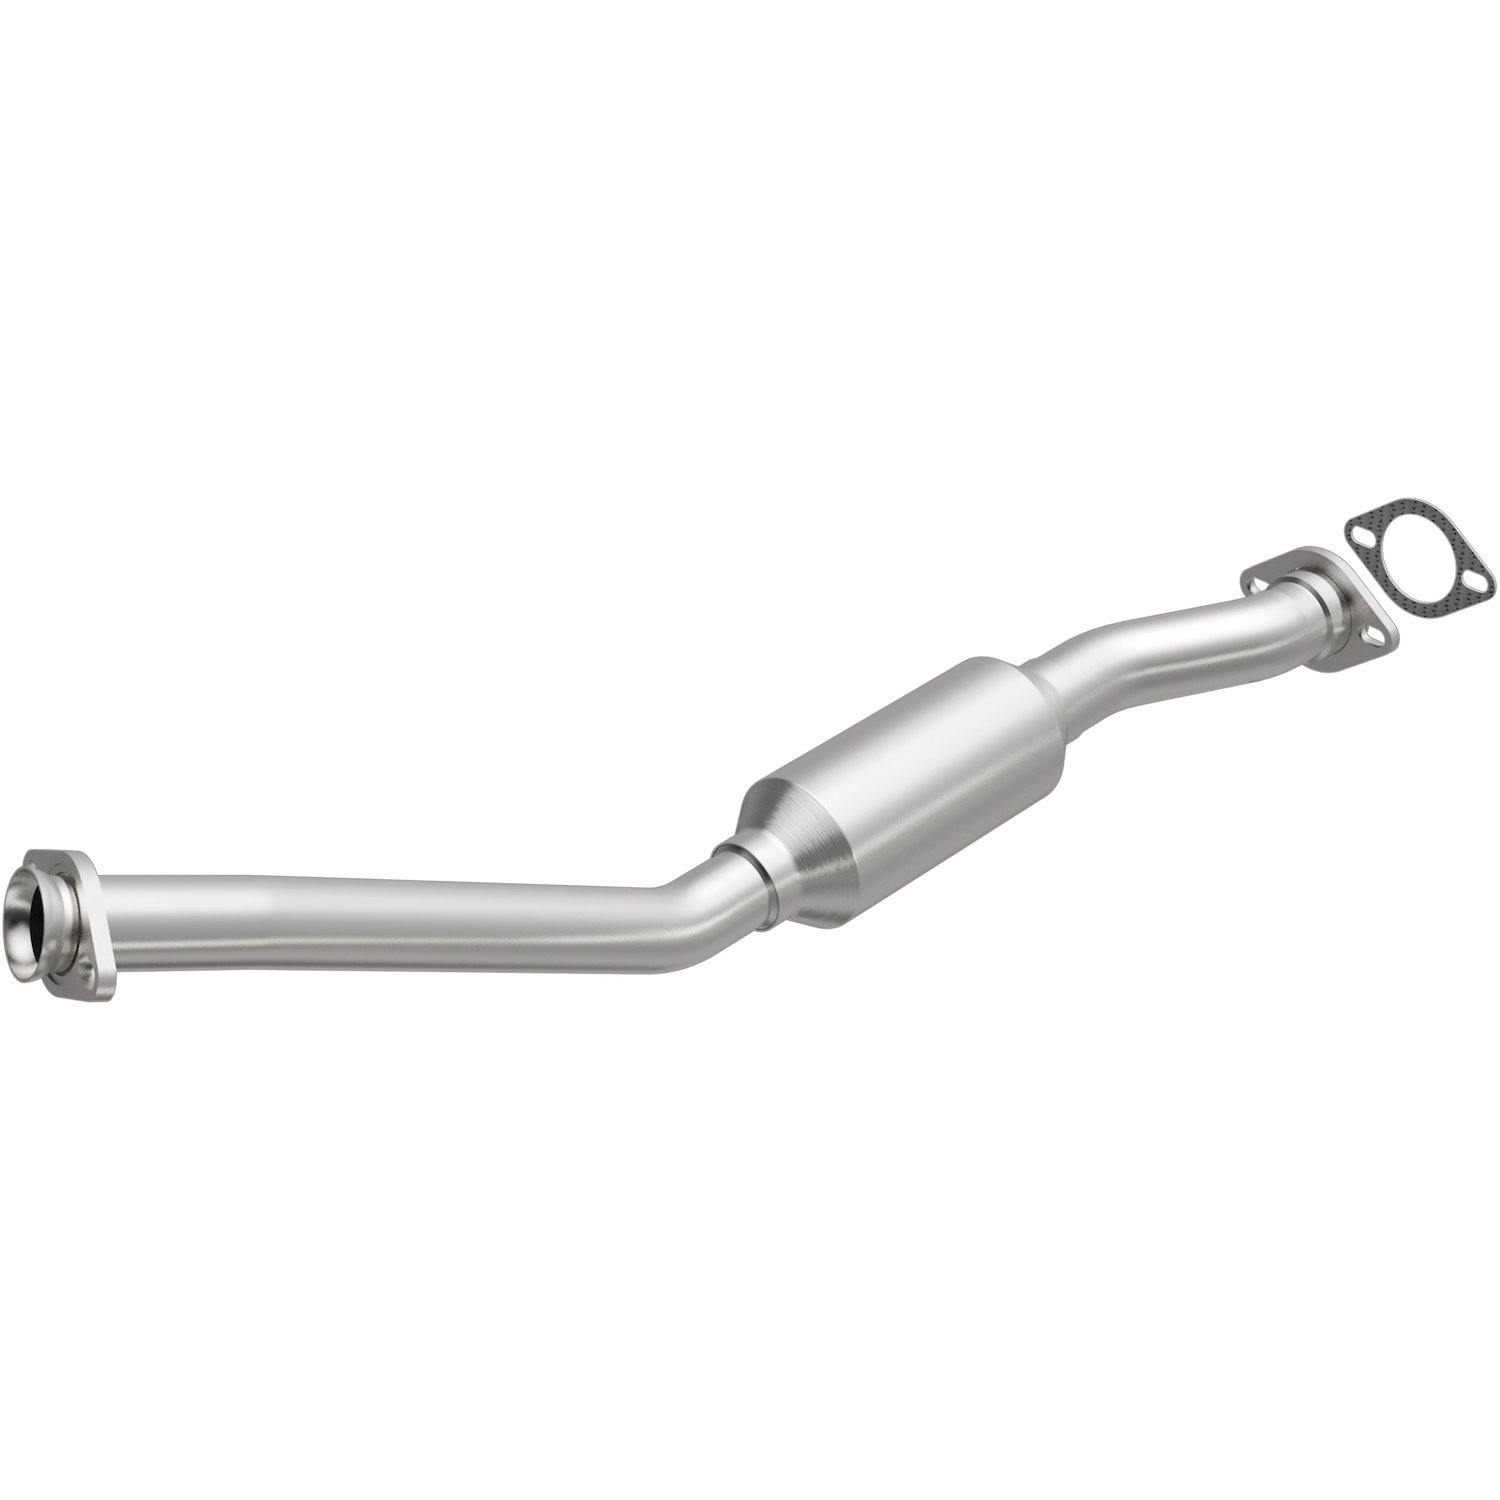 1983-1986 Ford Ranger California Grade CARB Compliant Direct-Fit Catalytic Converter